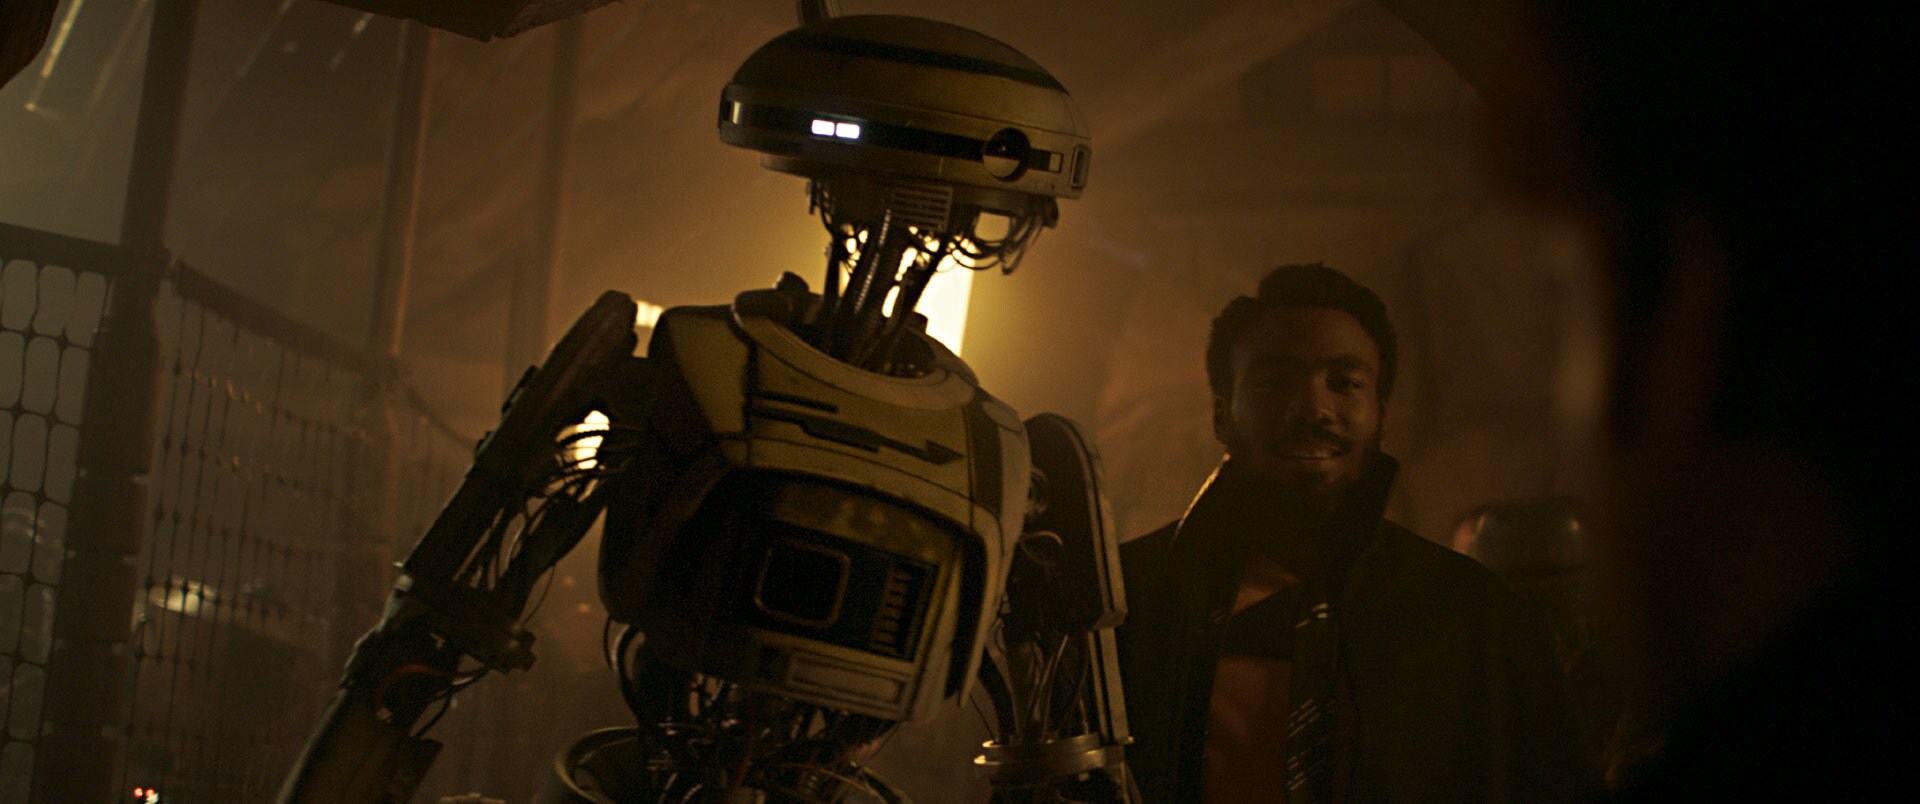 After cheating his way to victory, Lando agrees to come along on the Kessel job. But first he has...